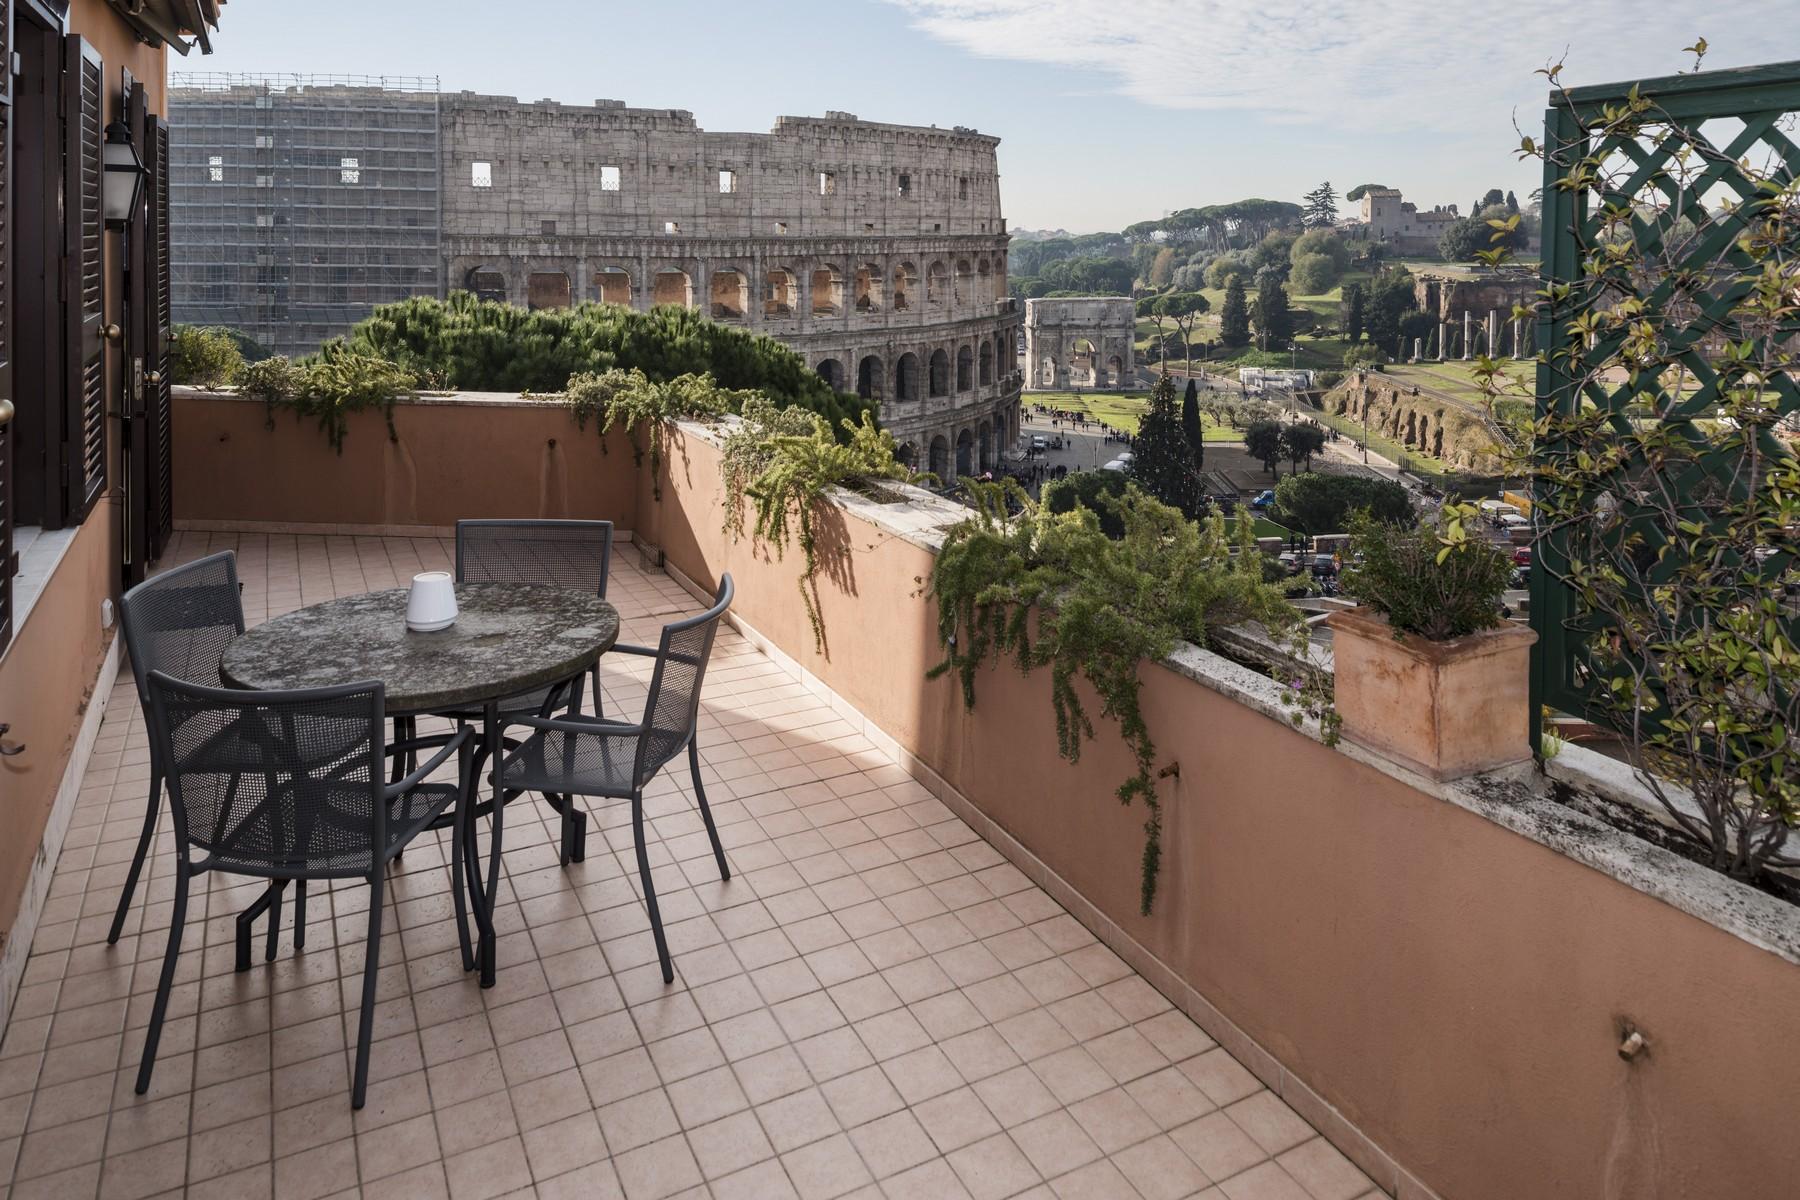 Penthouse overlooking the Colosseum - 4